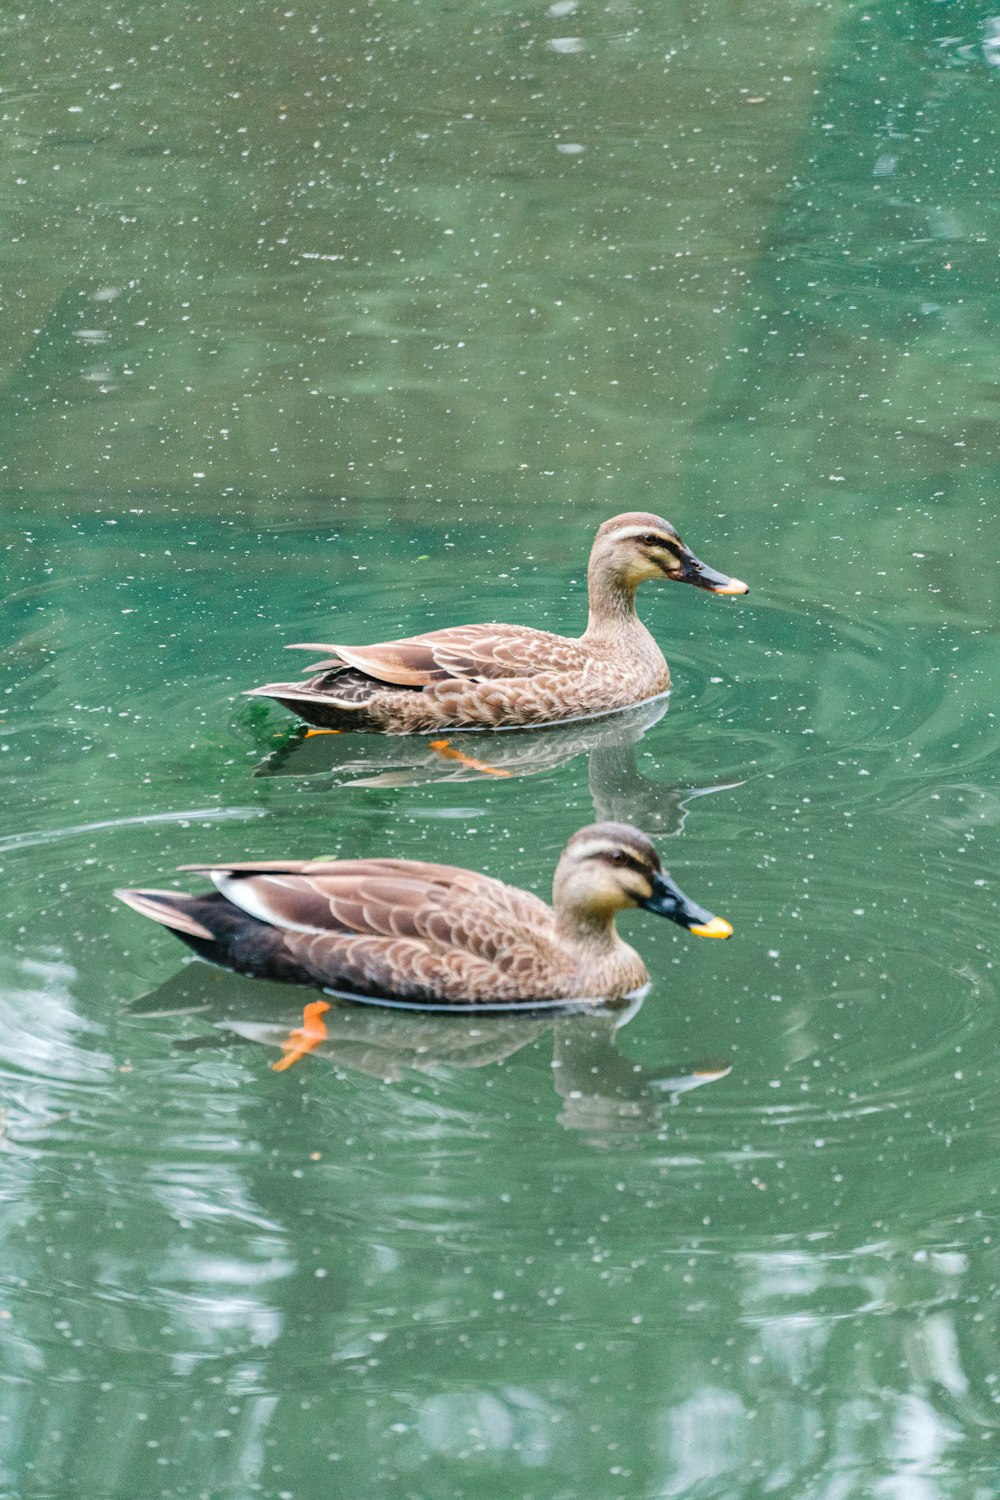 a couple of ducks swimming in water